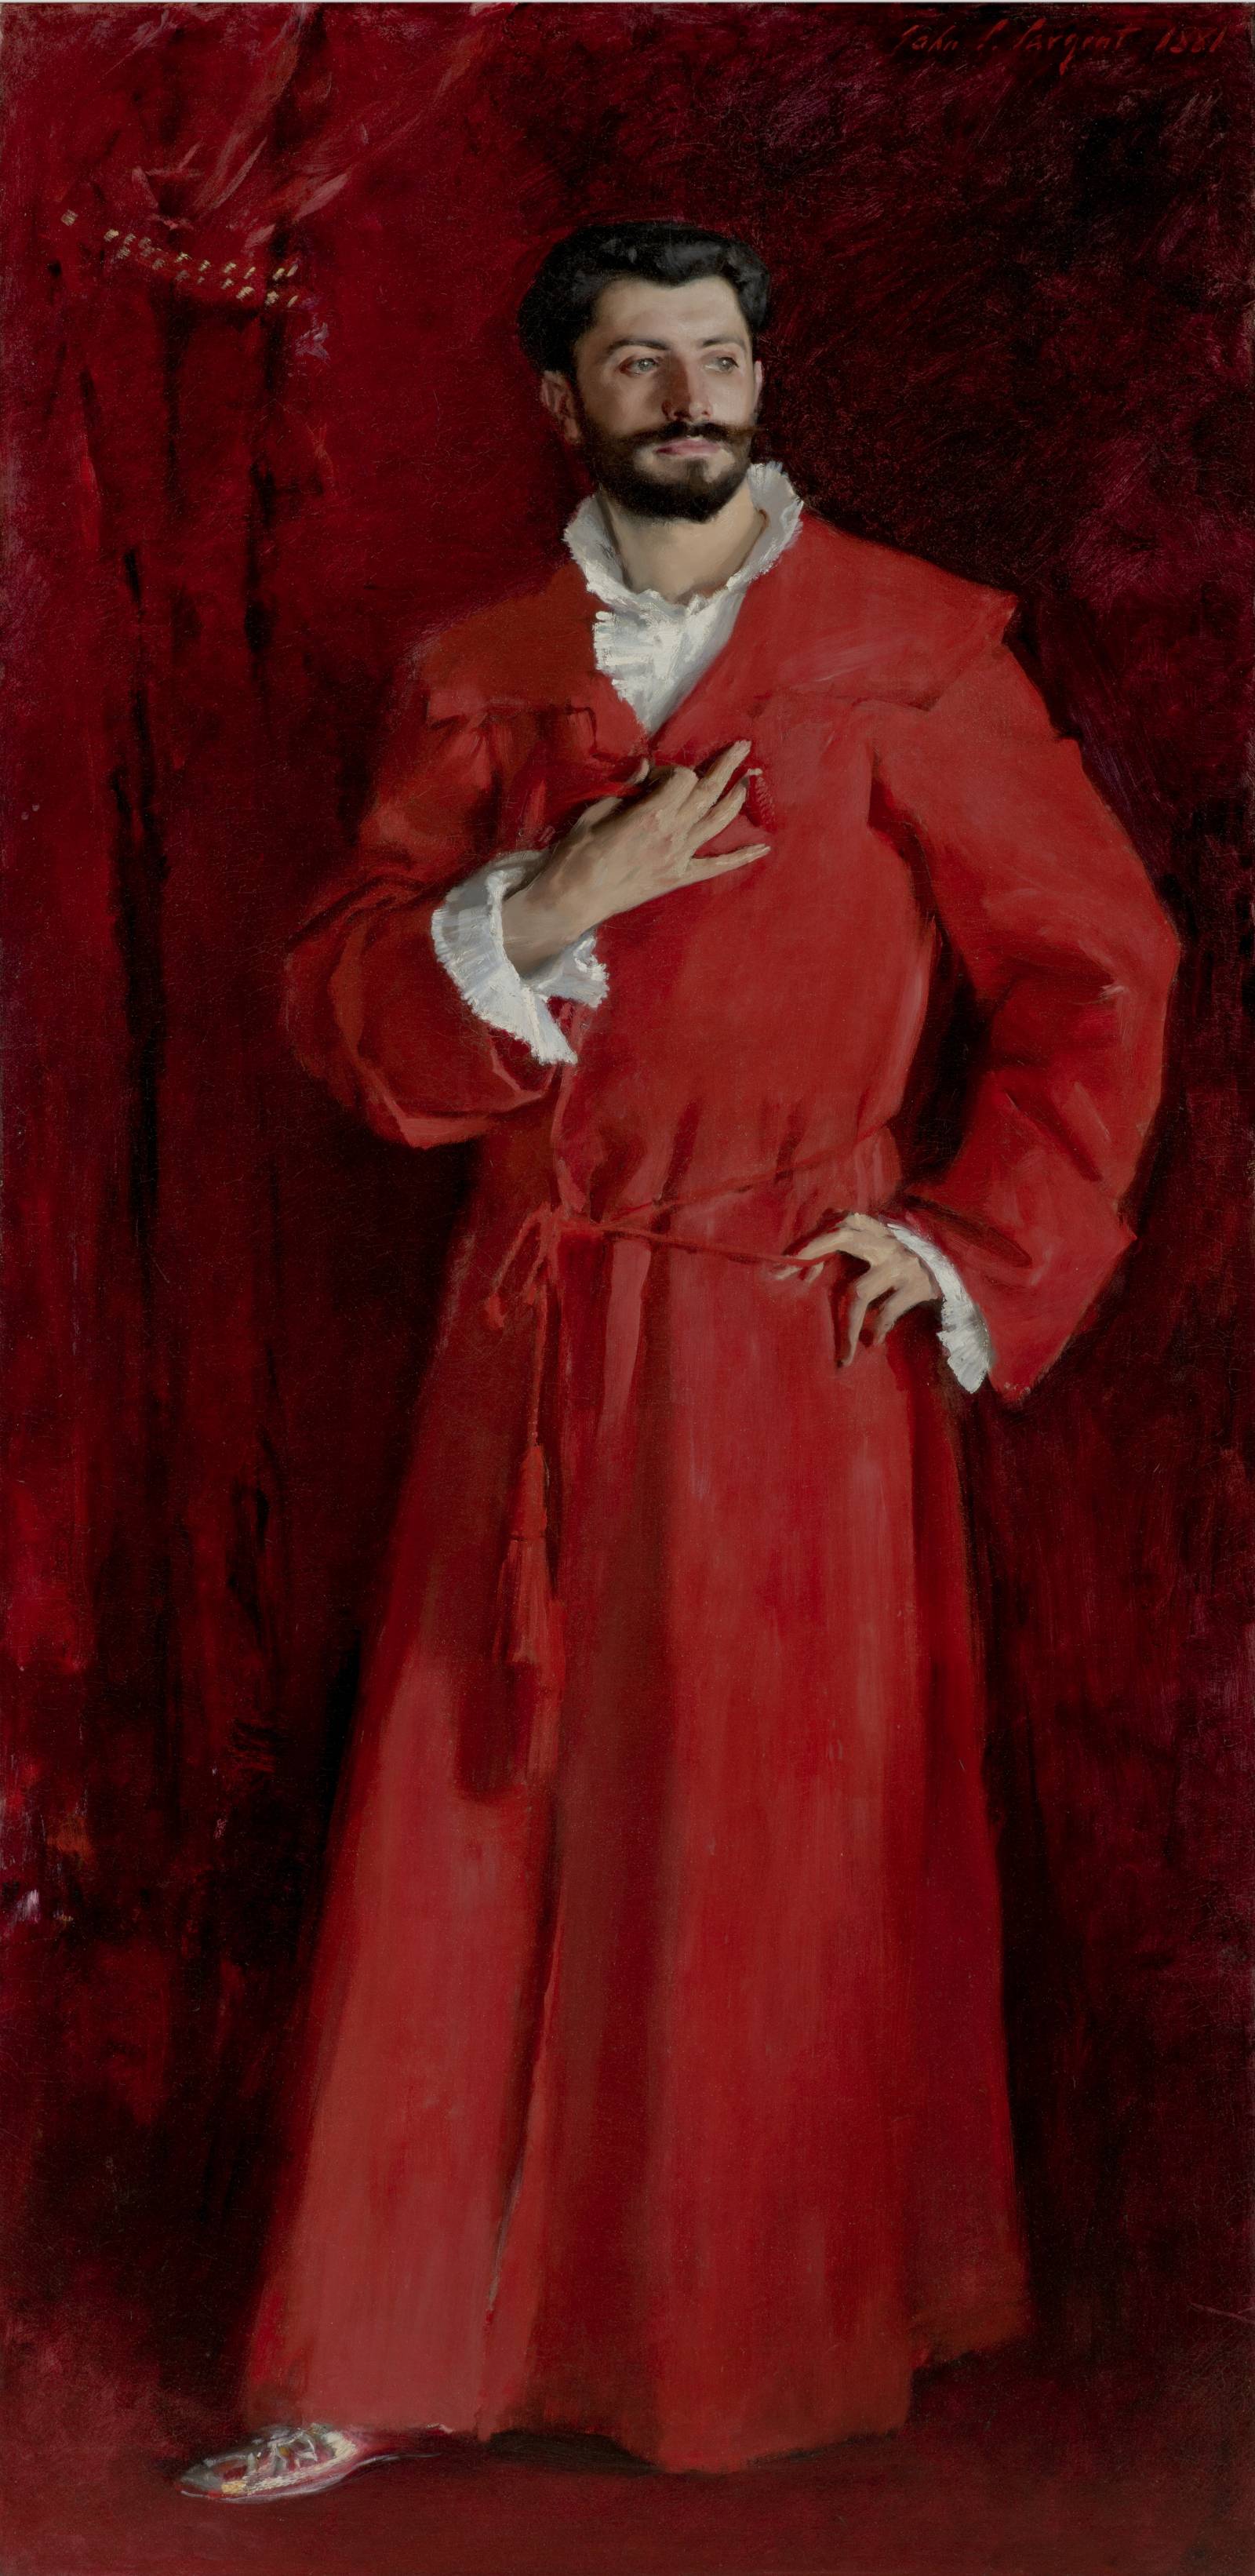 John Singer Sargent, Dr Pozzi at Home, 1881. (The Armand Hammer Collection, Gift of the Armand Hammer Foundation. Hammer Museum, Los Angeles)